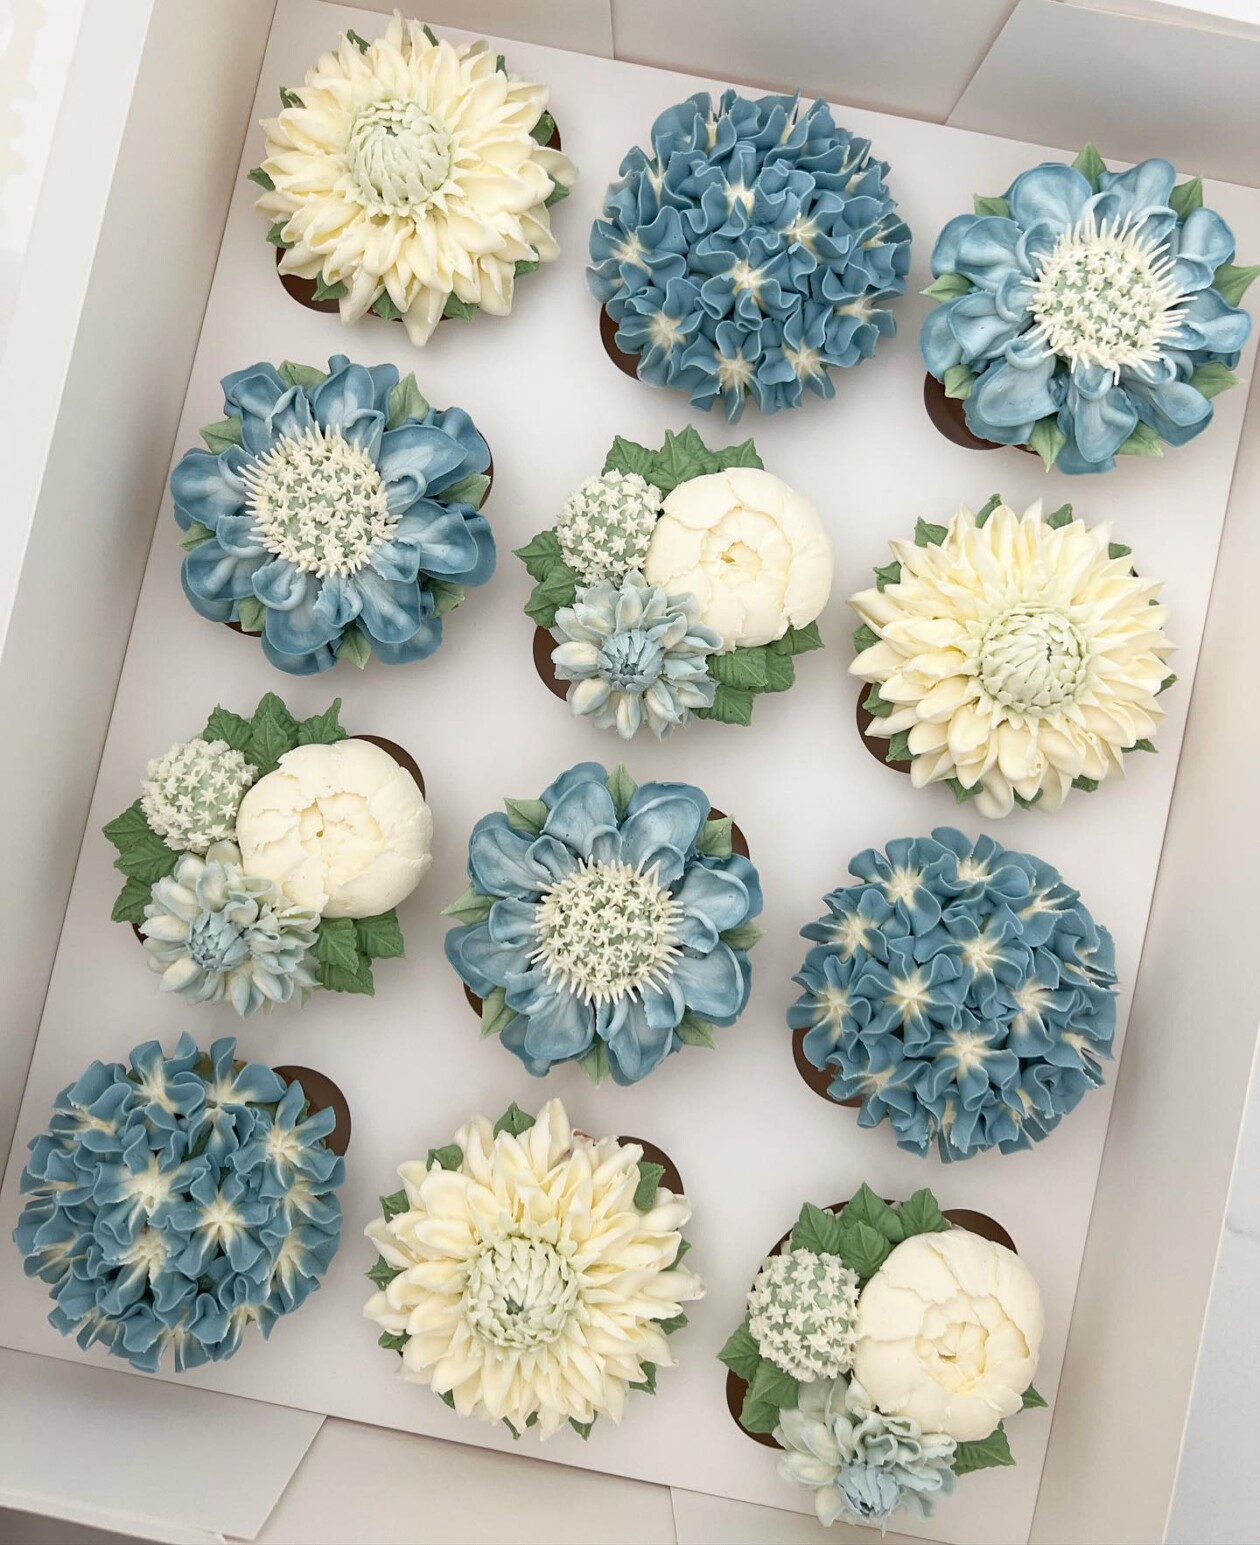 Gorgeous Cupcakes Decorated With Buttercream Flowers And Succulents By Kerry's Bouqcakes (6)